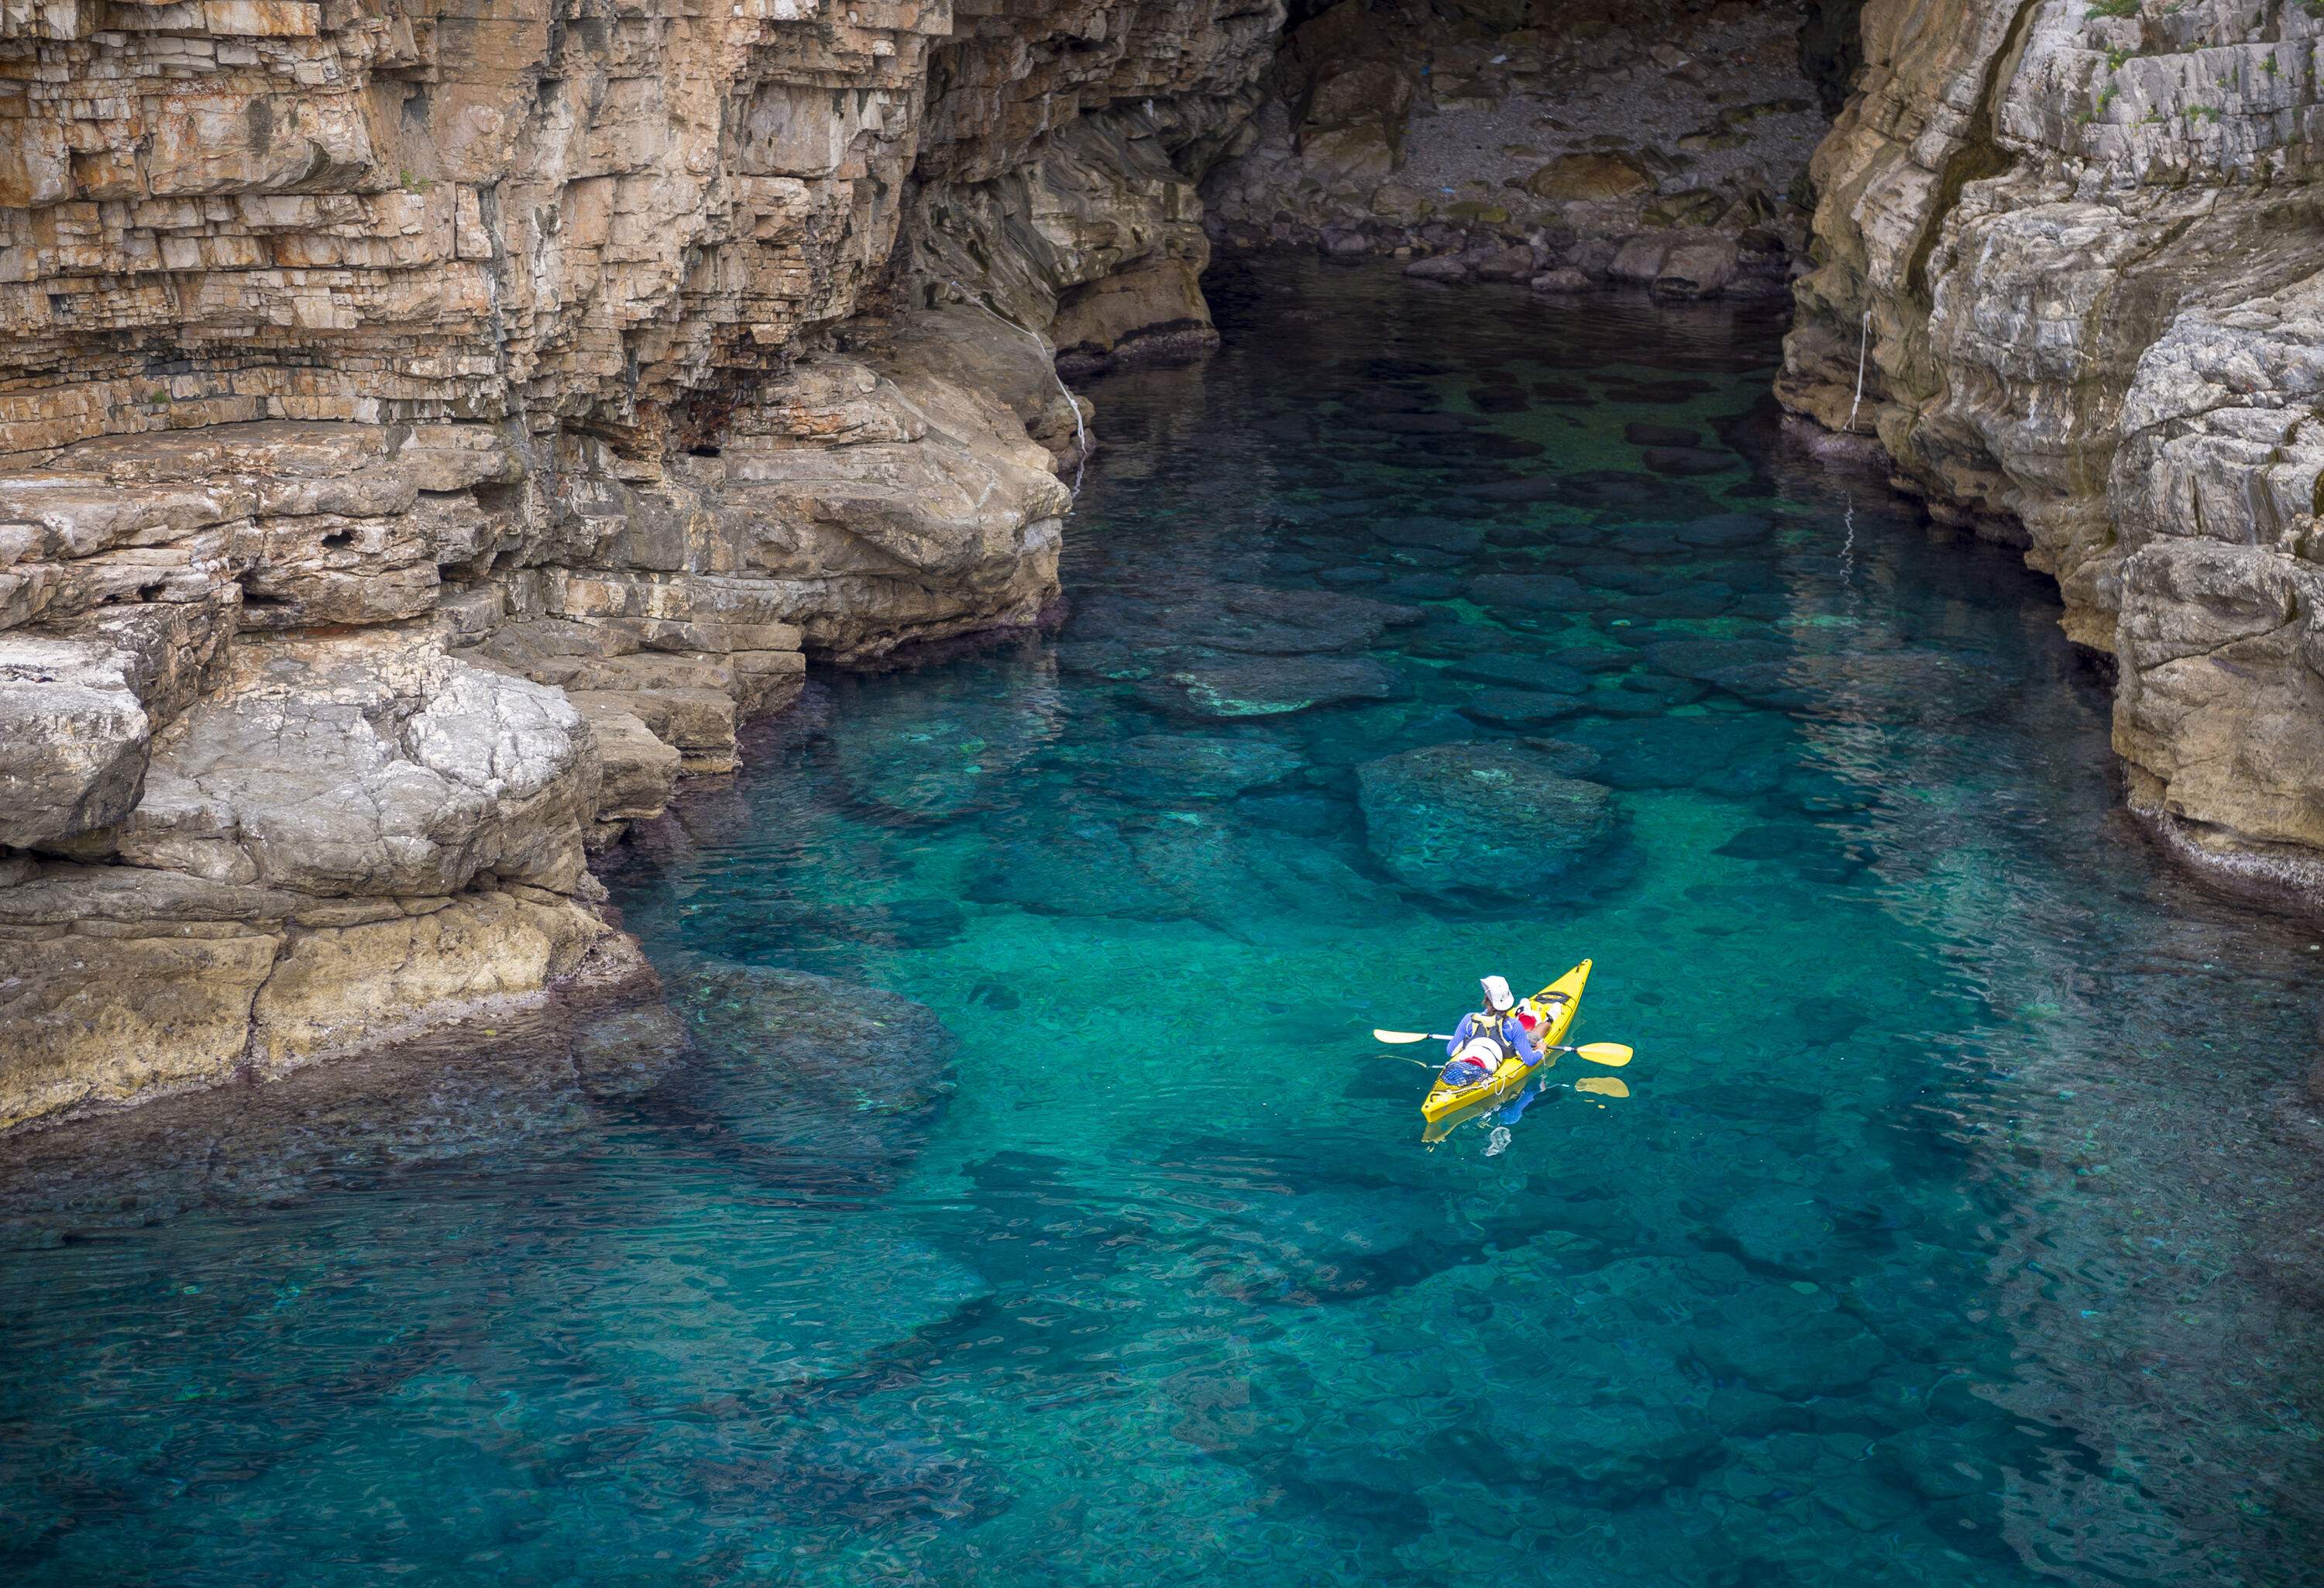 A kayaker glides away on tranquil waters, surrounded by majestic rock cliffs and crystal-clear views.